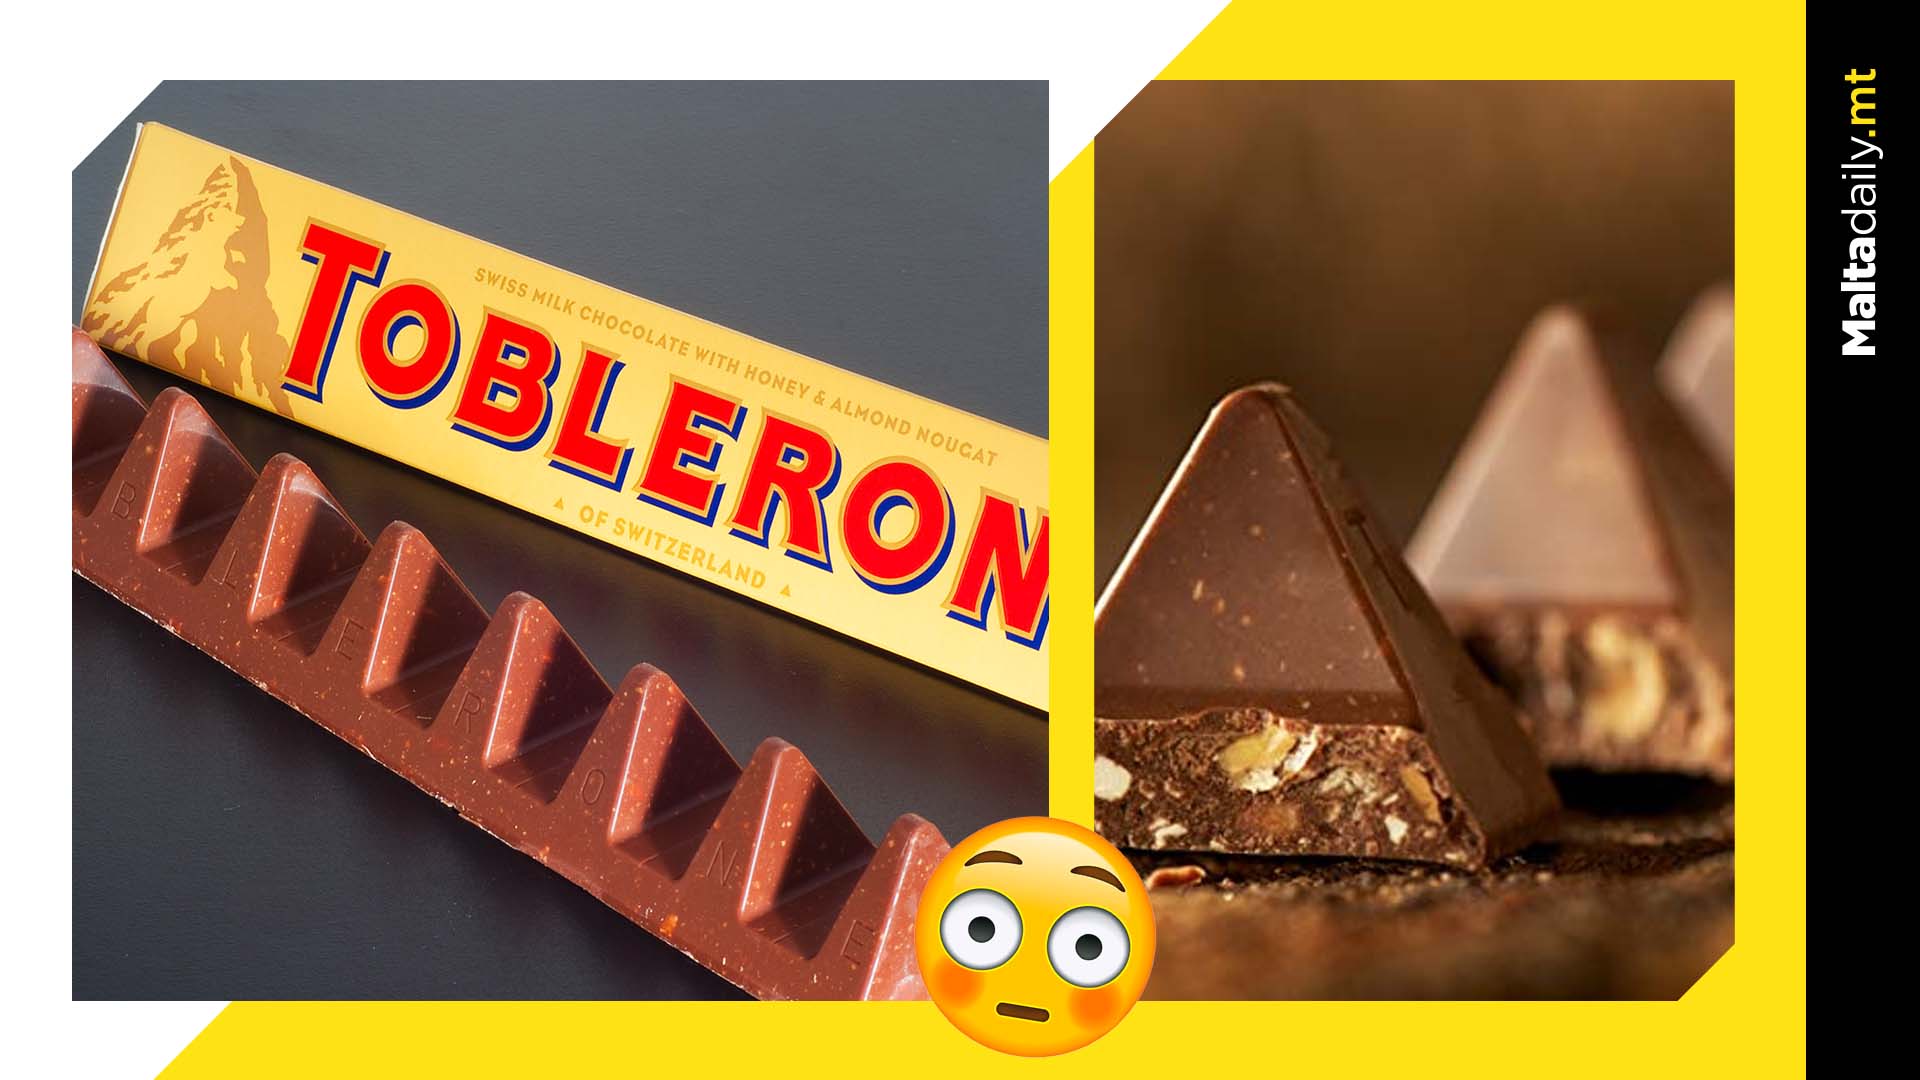 Toblerone forced to change mountain logo on package